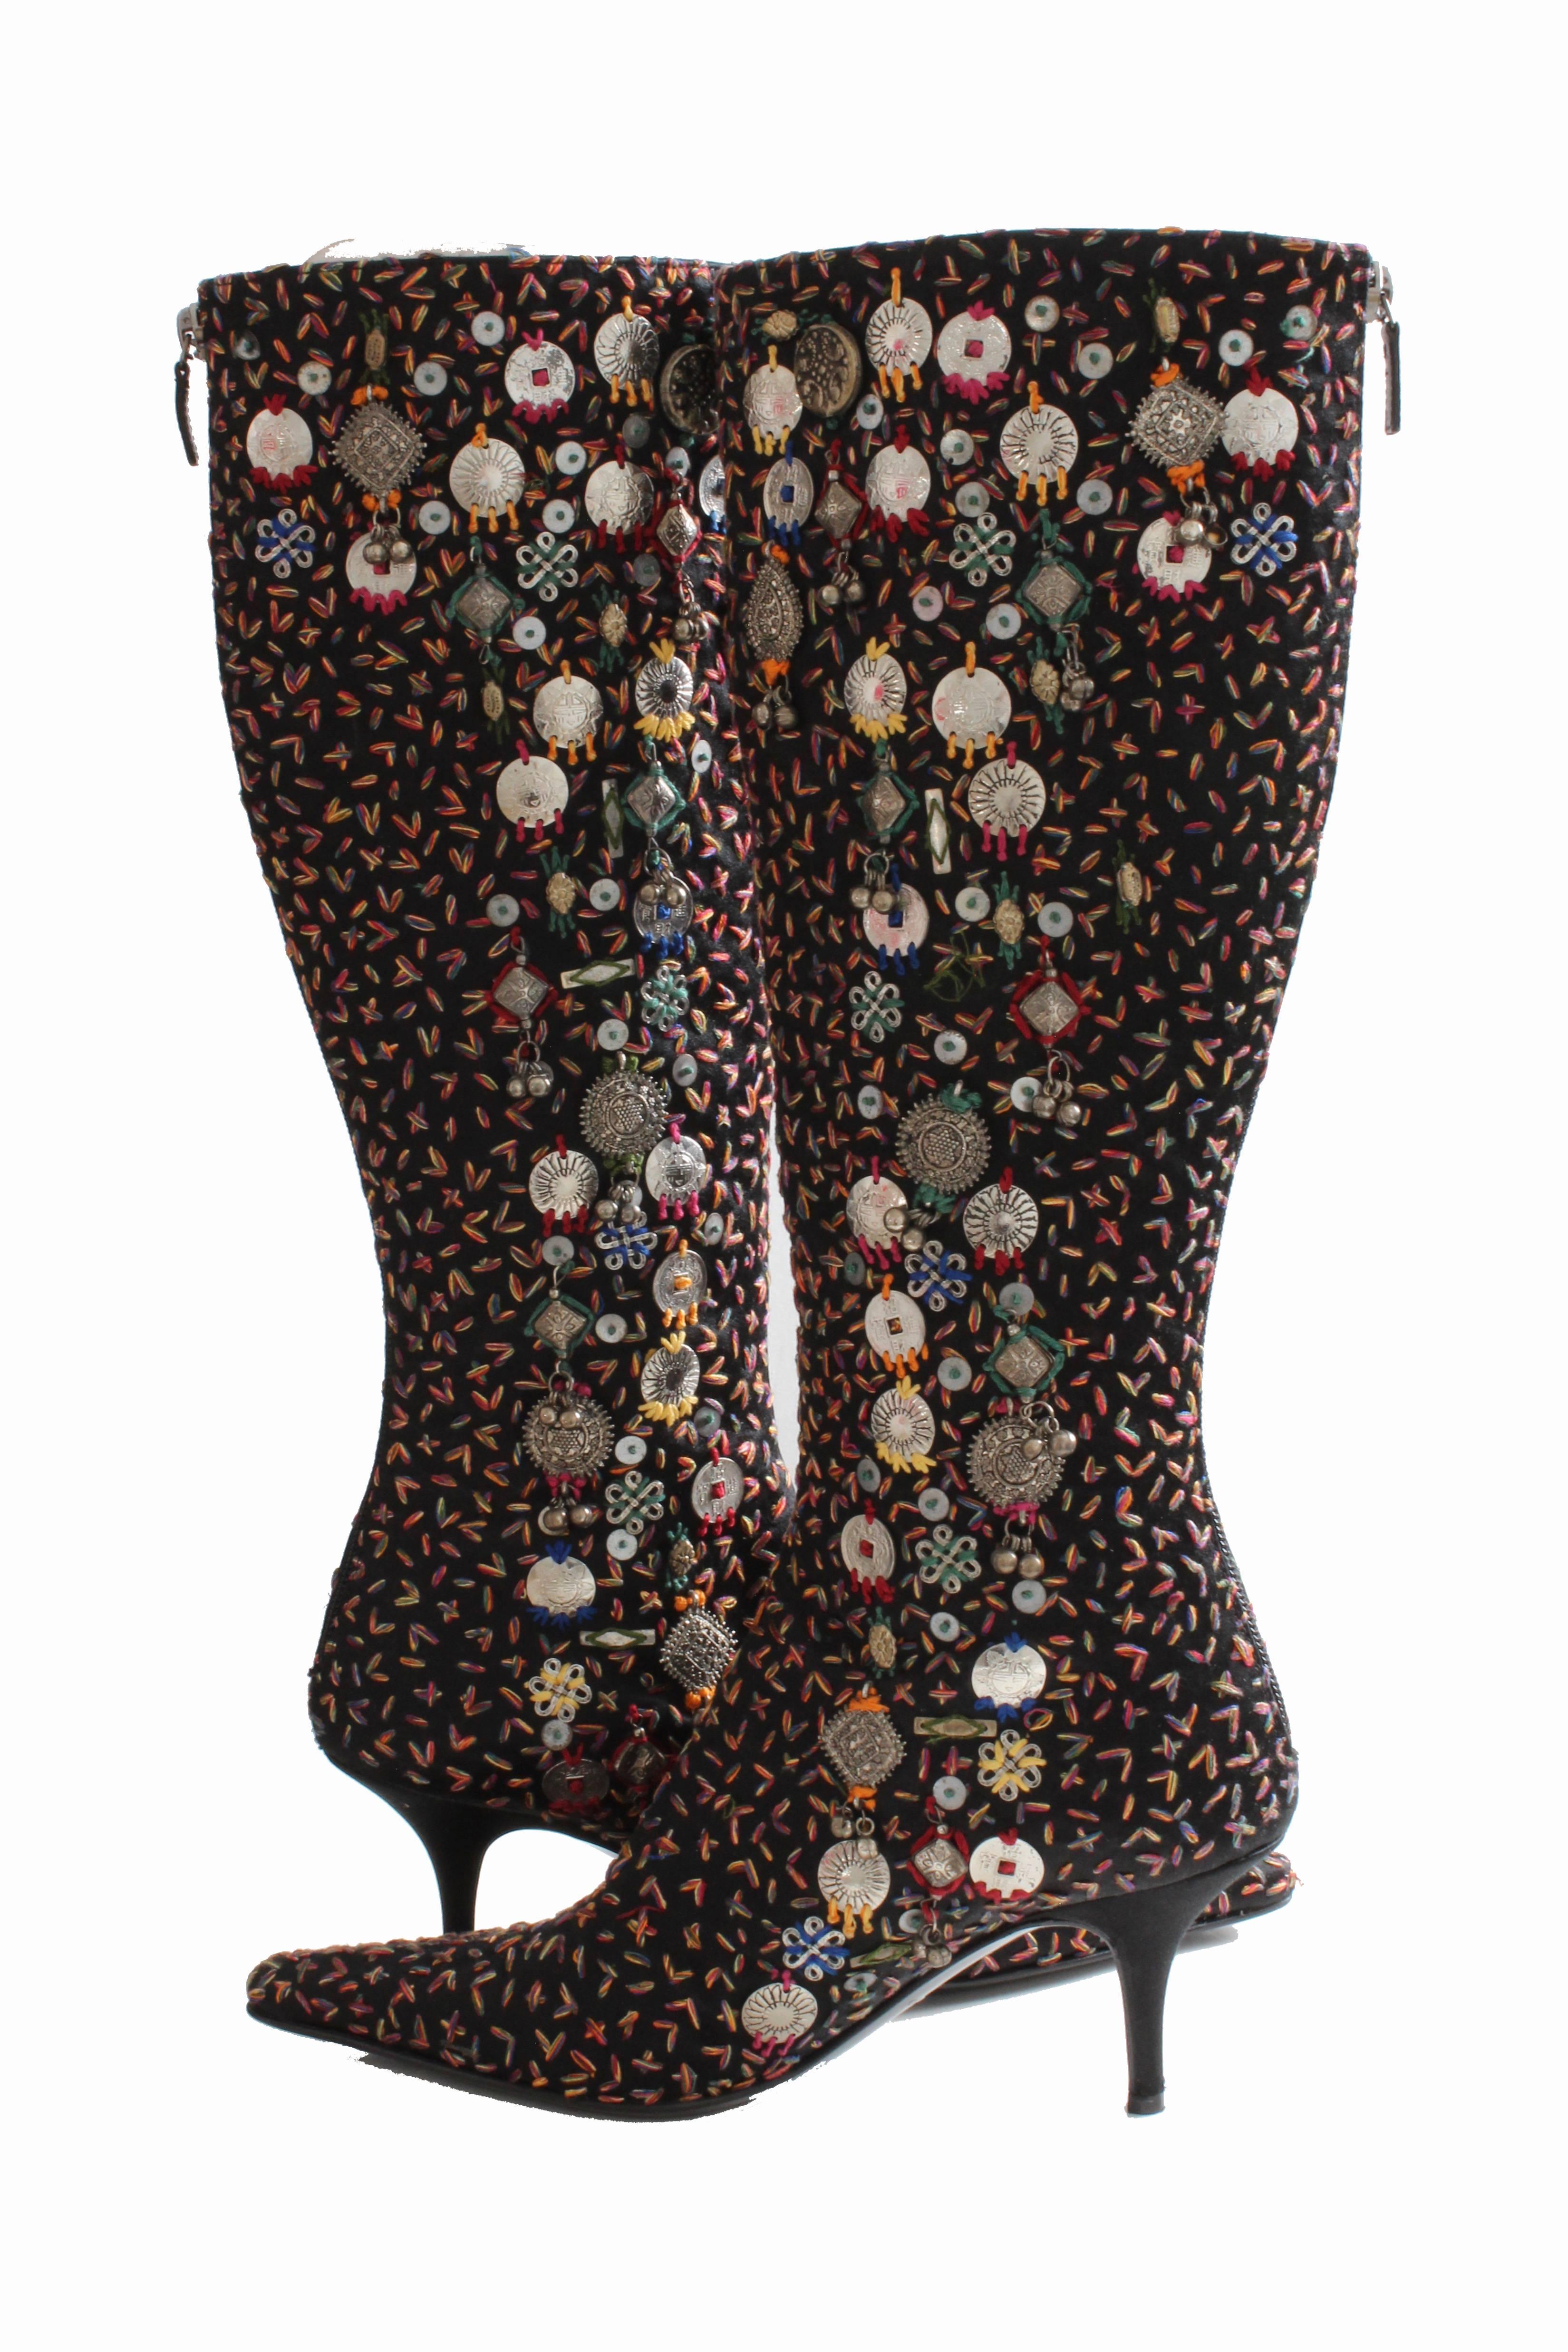 Oscar de la Renta Embellished Knee High Boots Black with Embroidery Italy 2